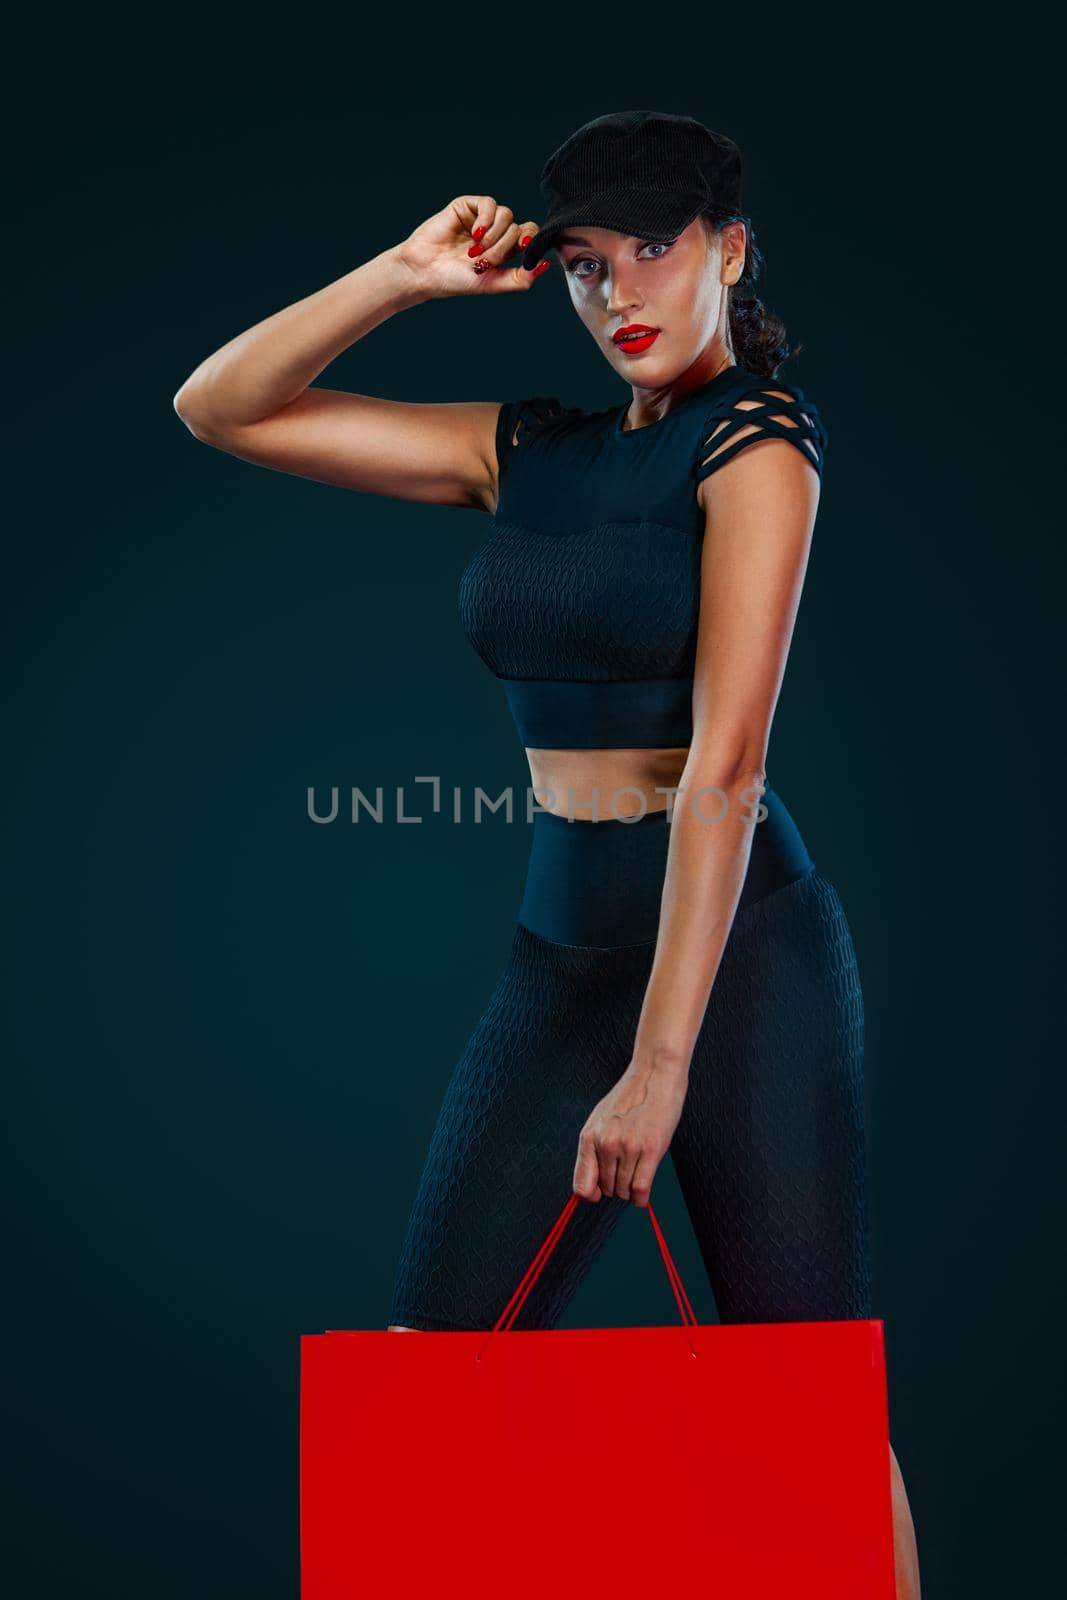 Black friday sale concept for fitness shop. Shopping woman in sportswear and hat holding red bag isolated on dark background.